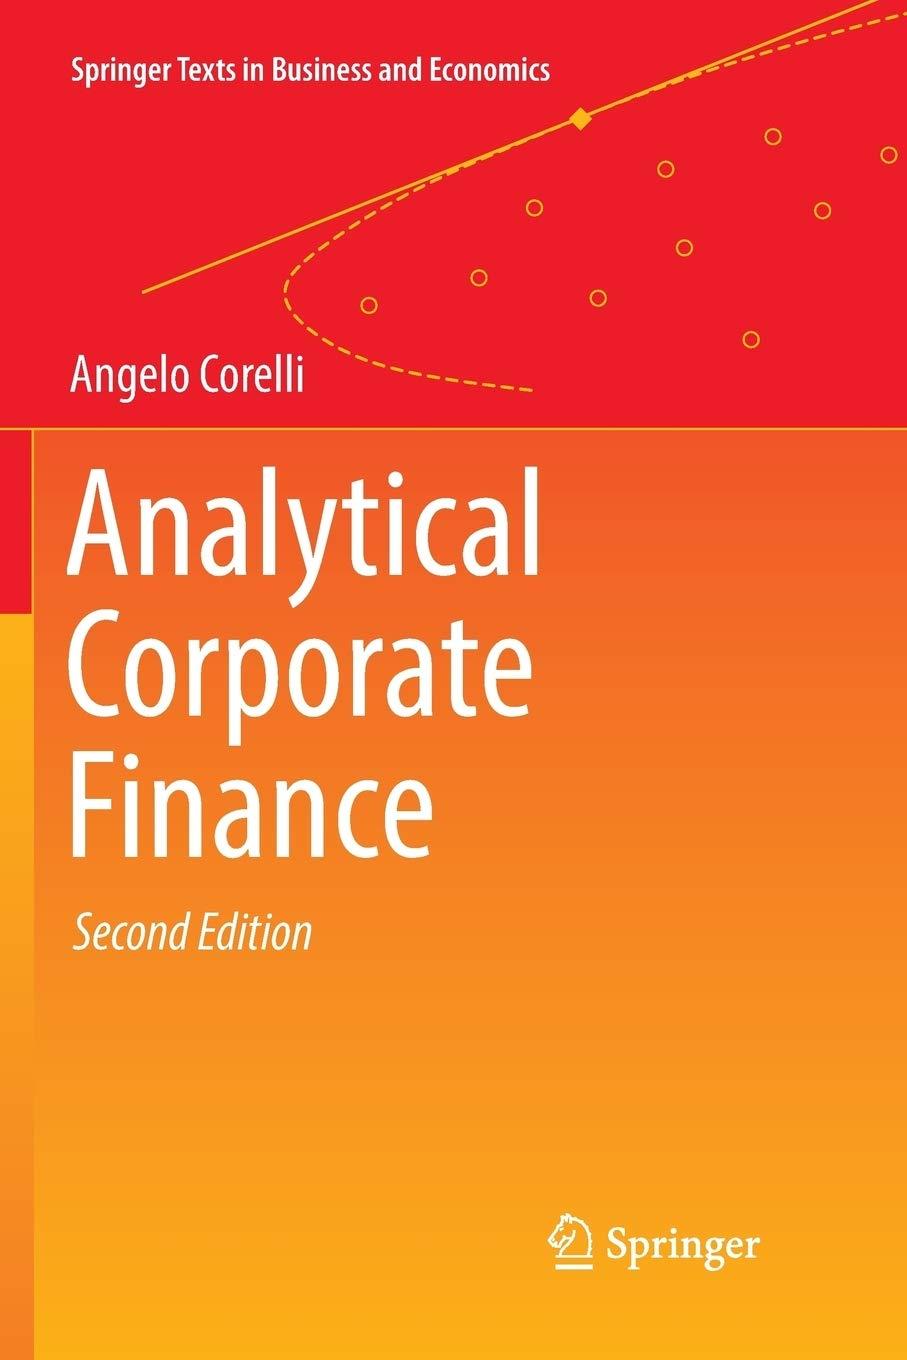 analytical corporate finance 2nd edition angelo corelli 3030070921, 978-3030070922